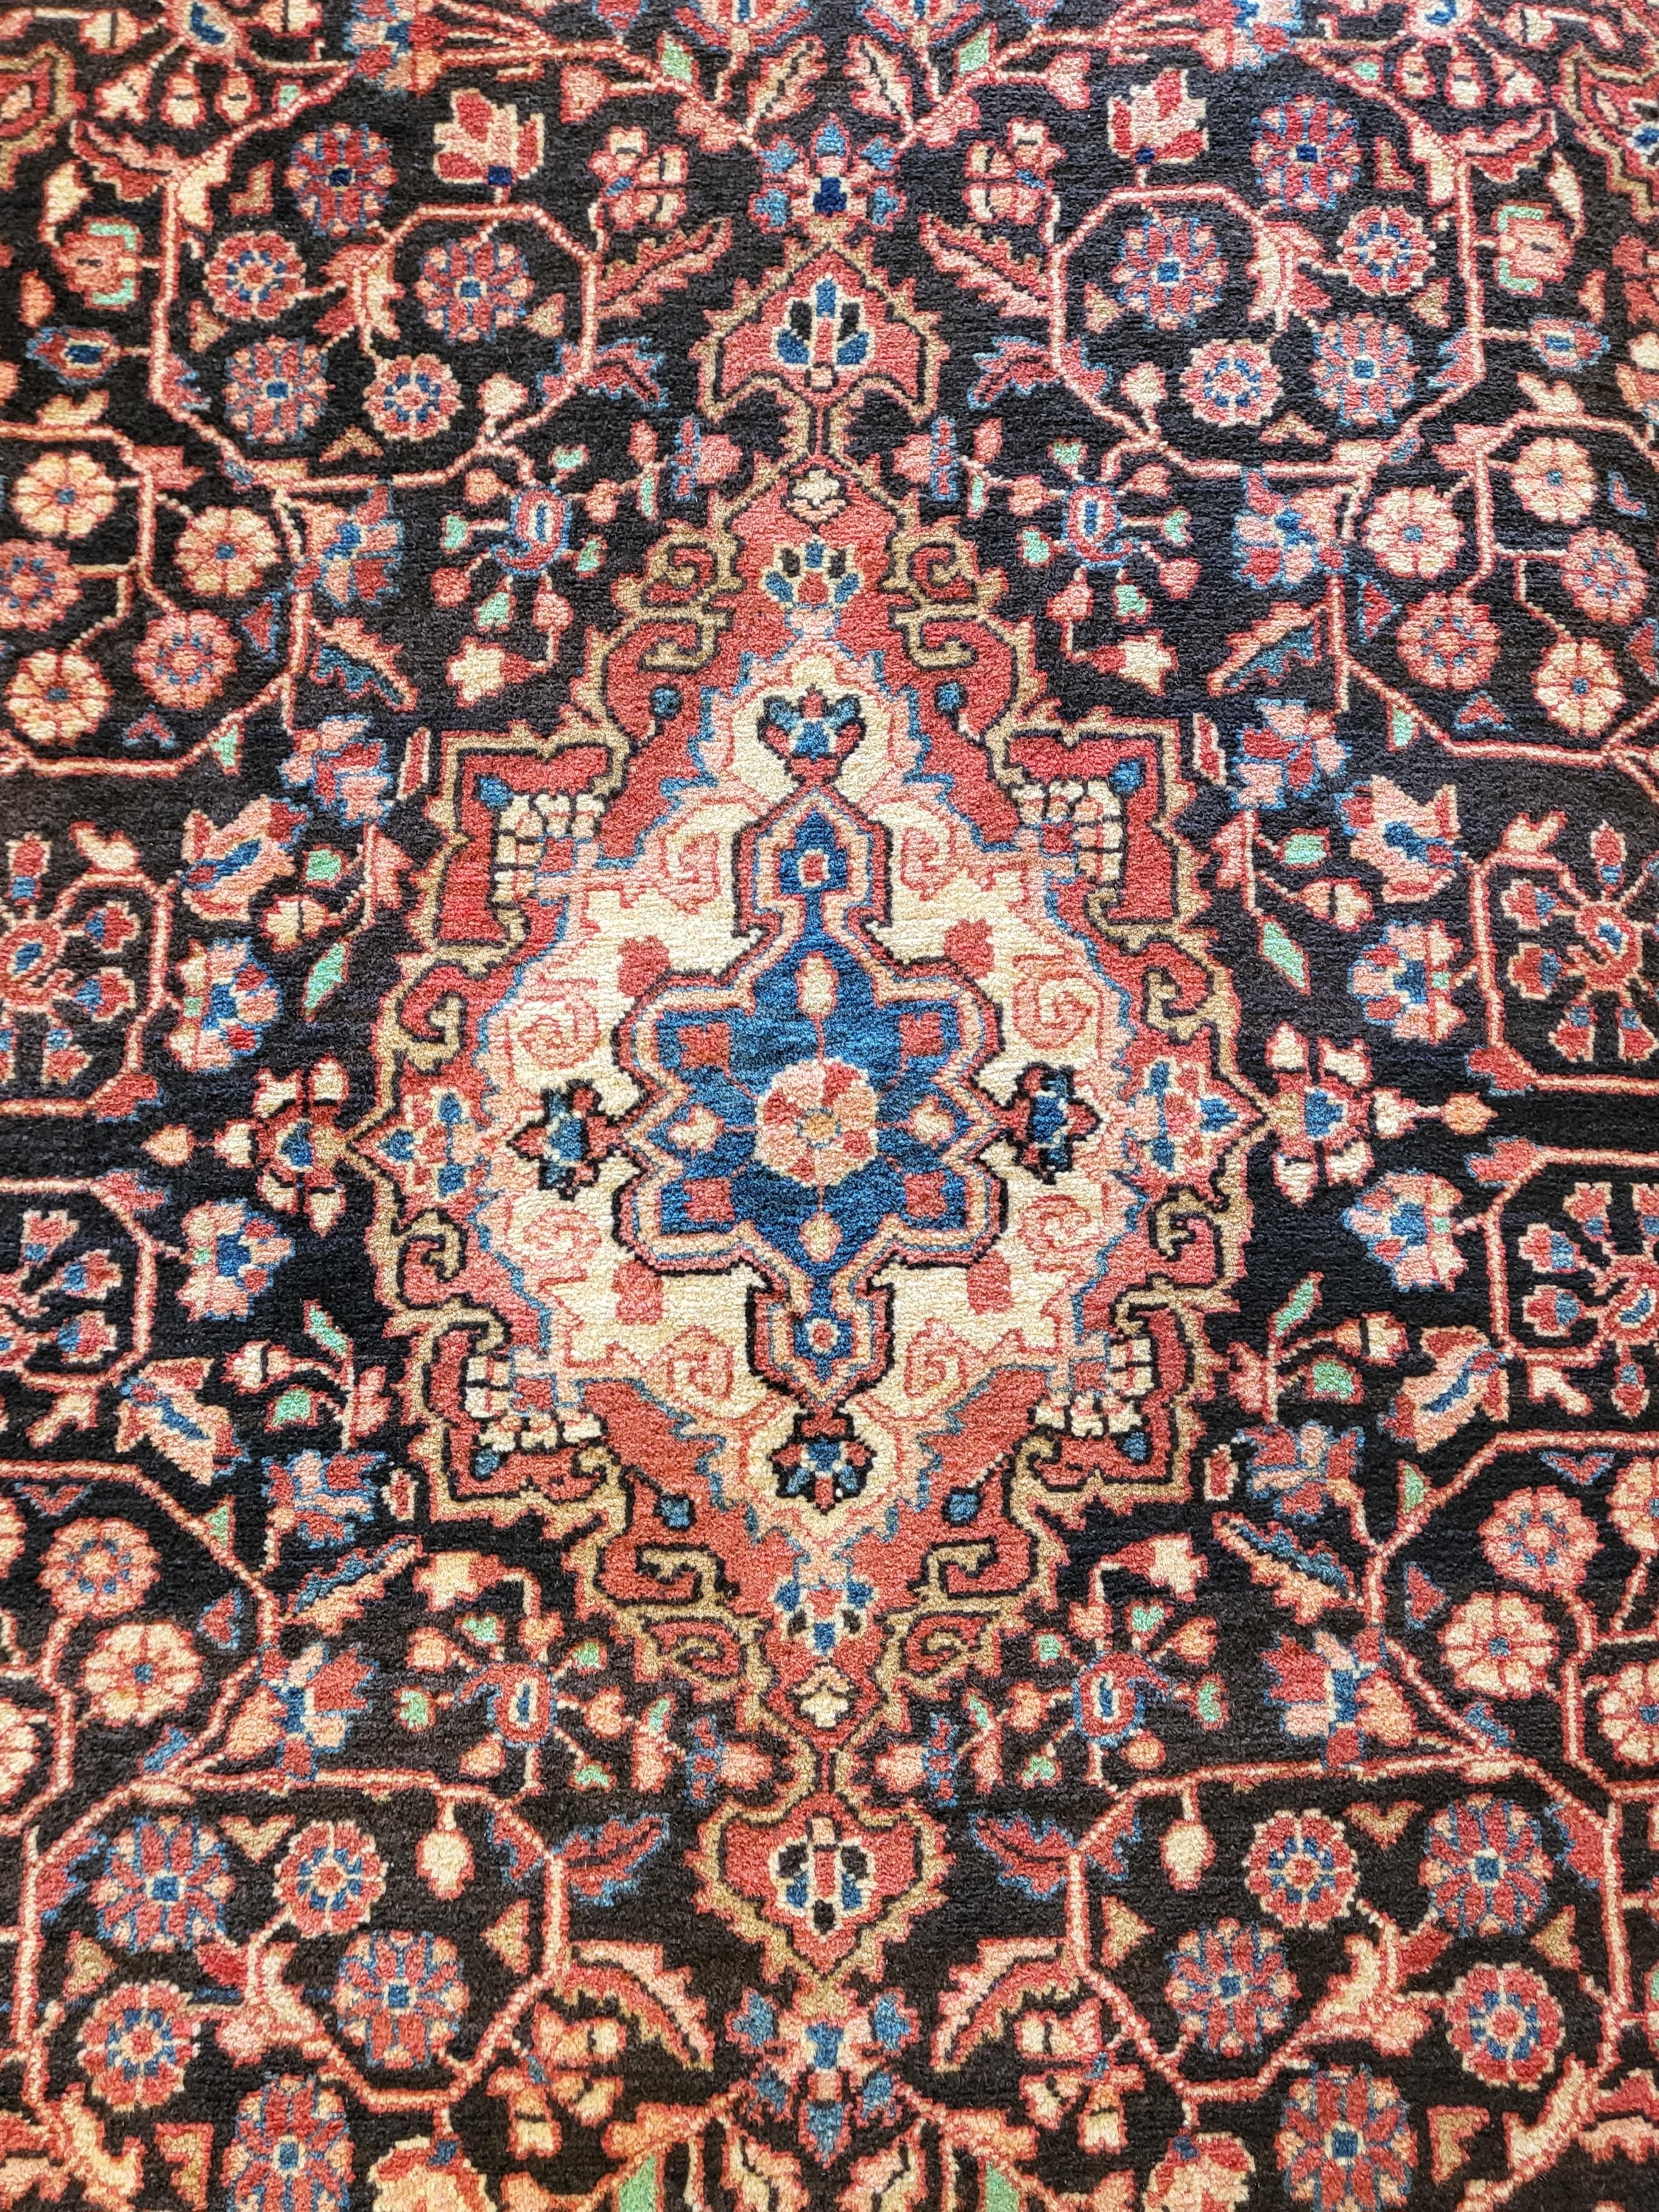 Immaculate 60's Persian Farahan - 4.5'x7'

Featuring an intricate geometric floral design that is the signature of the weavers in that area. 

The carefully selected color pallet of this piece attributes to its ellagence and attracts the eye.

This